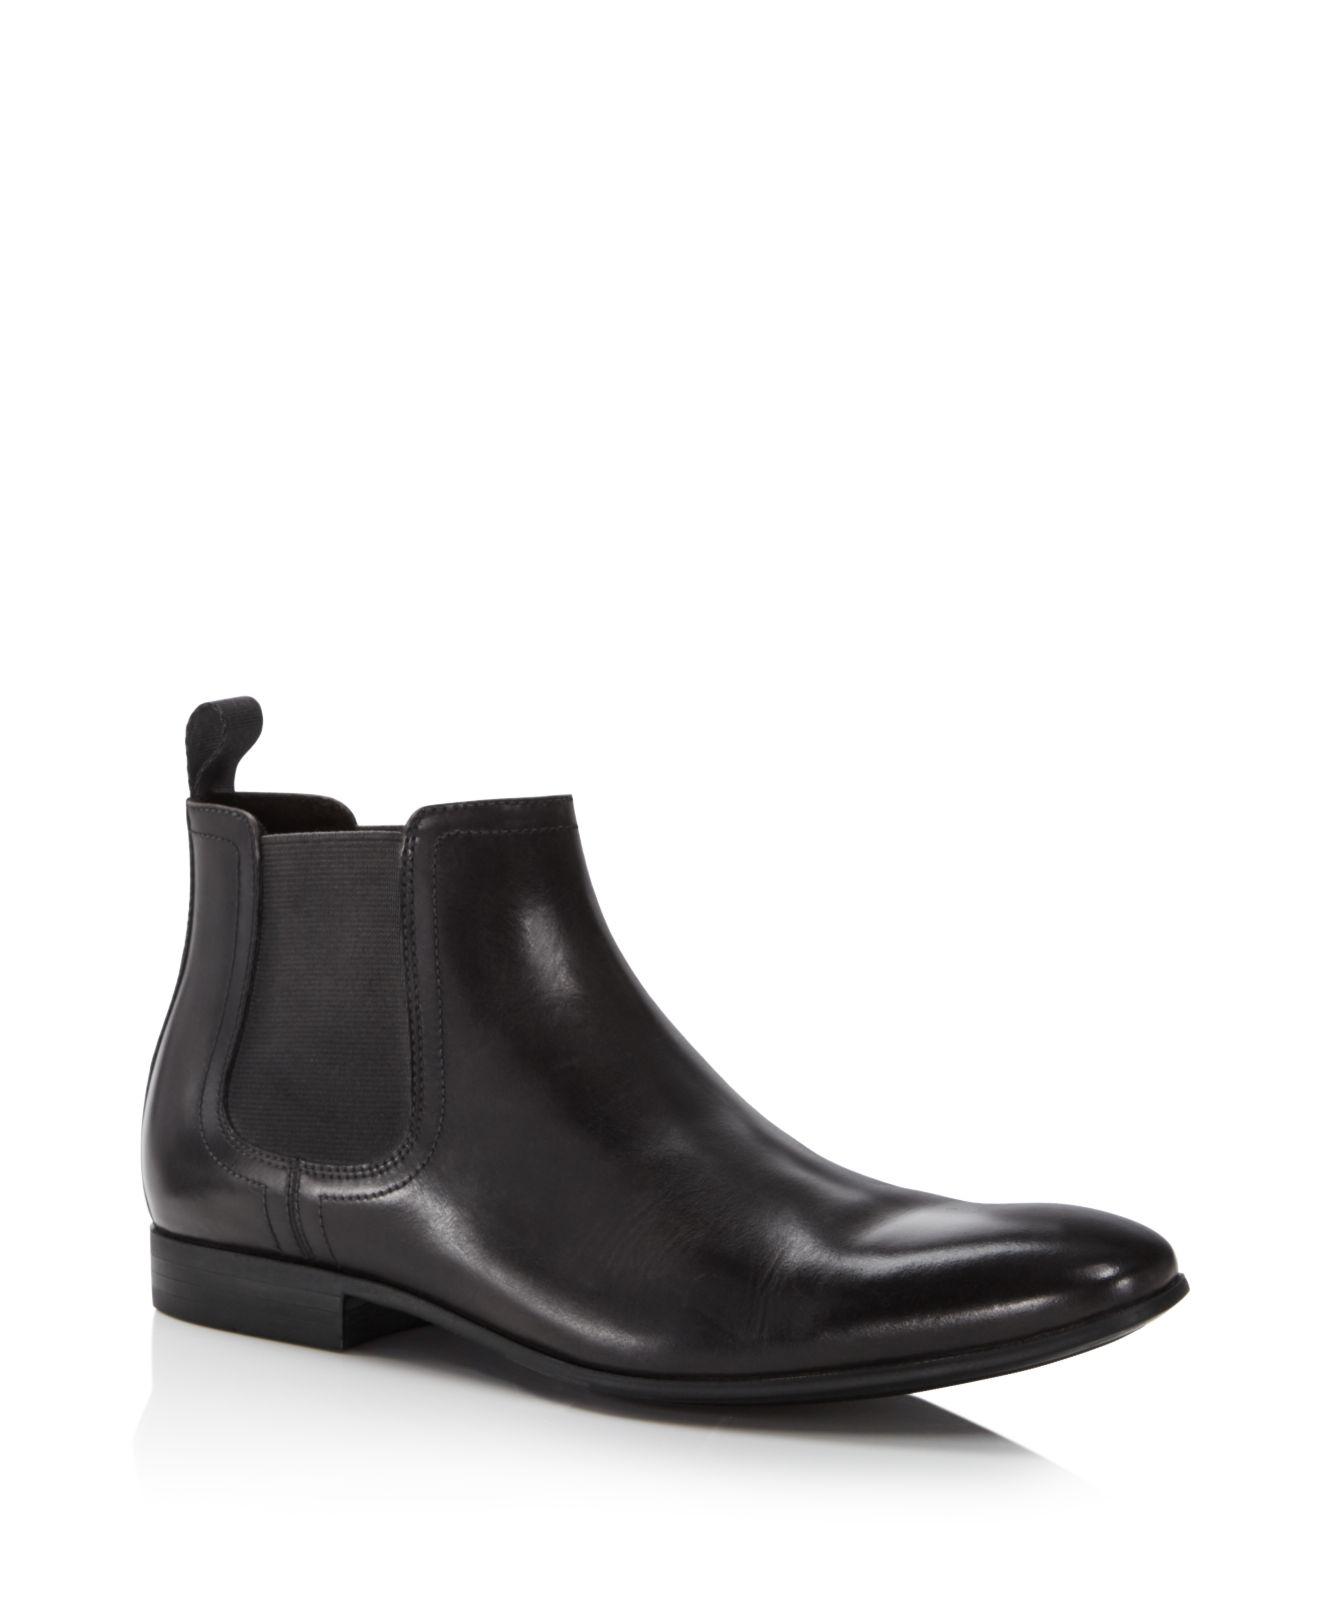 Lyst - Kenneth cole Chelsea Boots in Black for Men